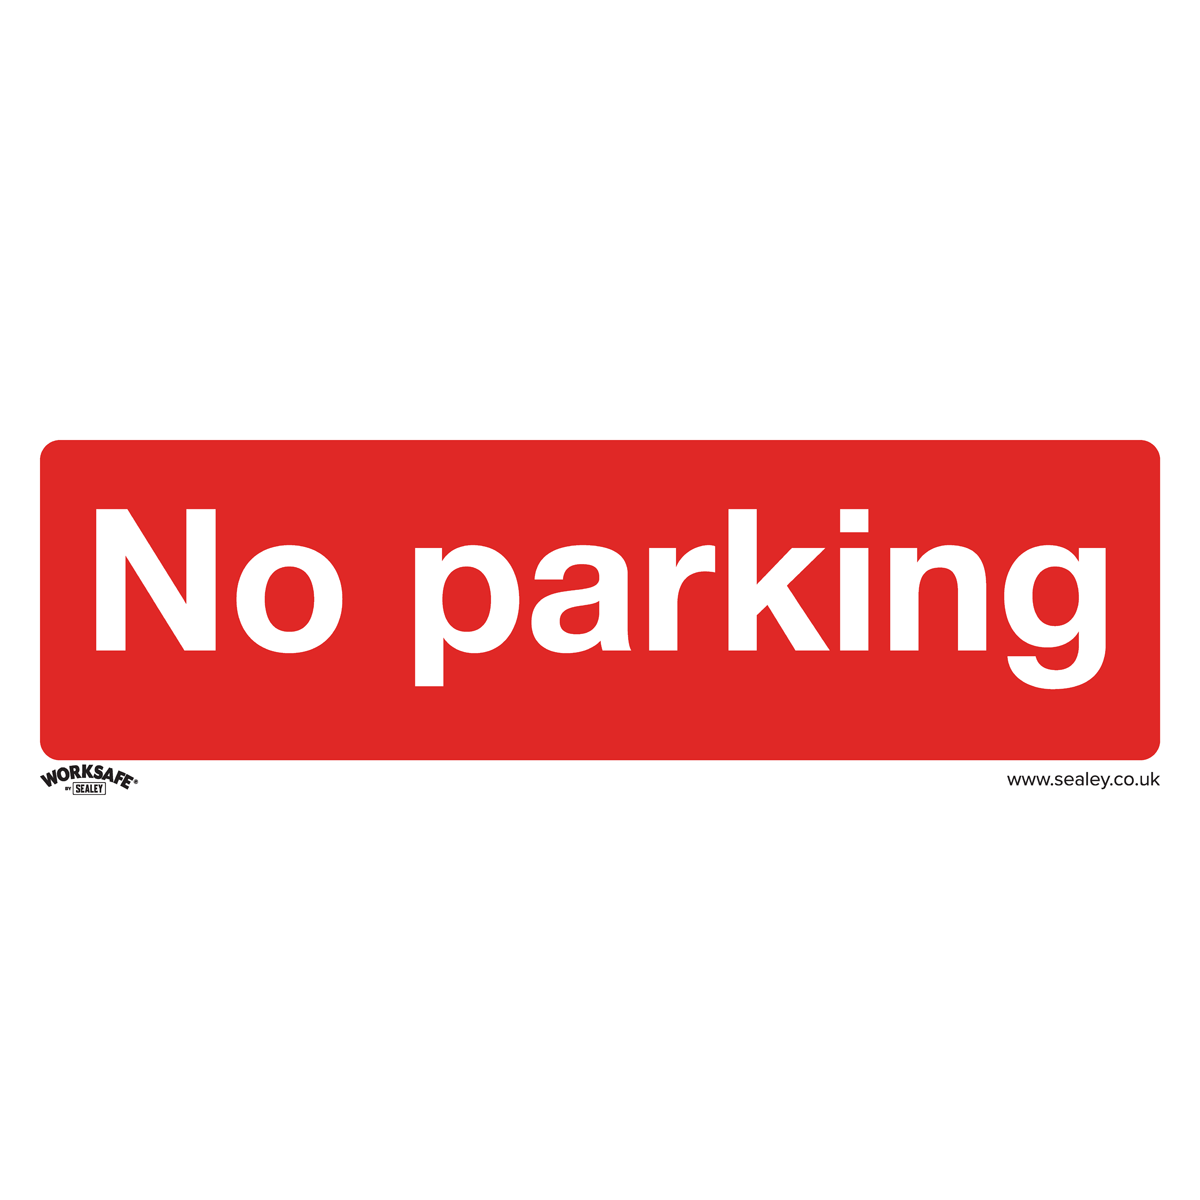 Sealey Prohibition Safety Sign - No Parking - Self-Adhesive Vinyl